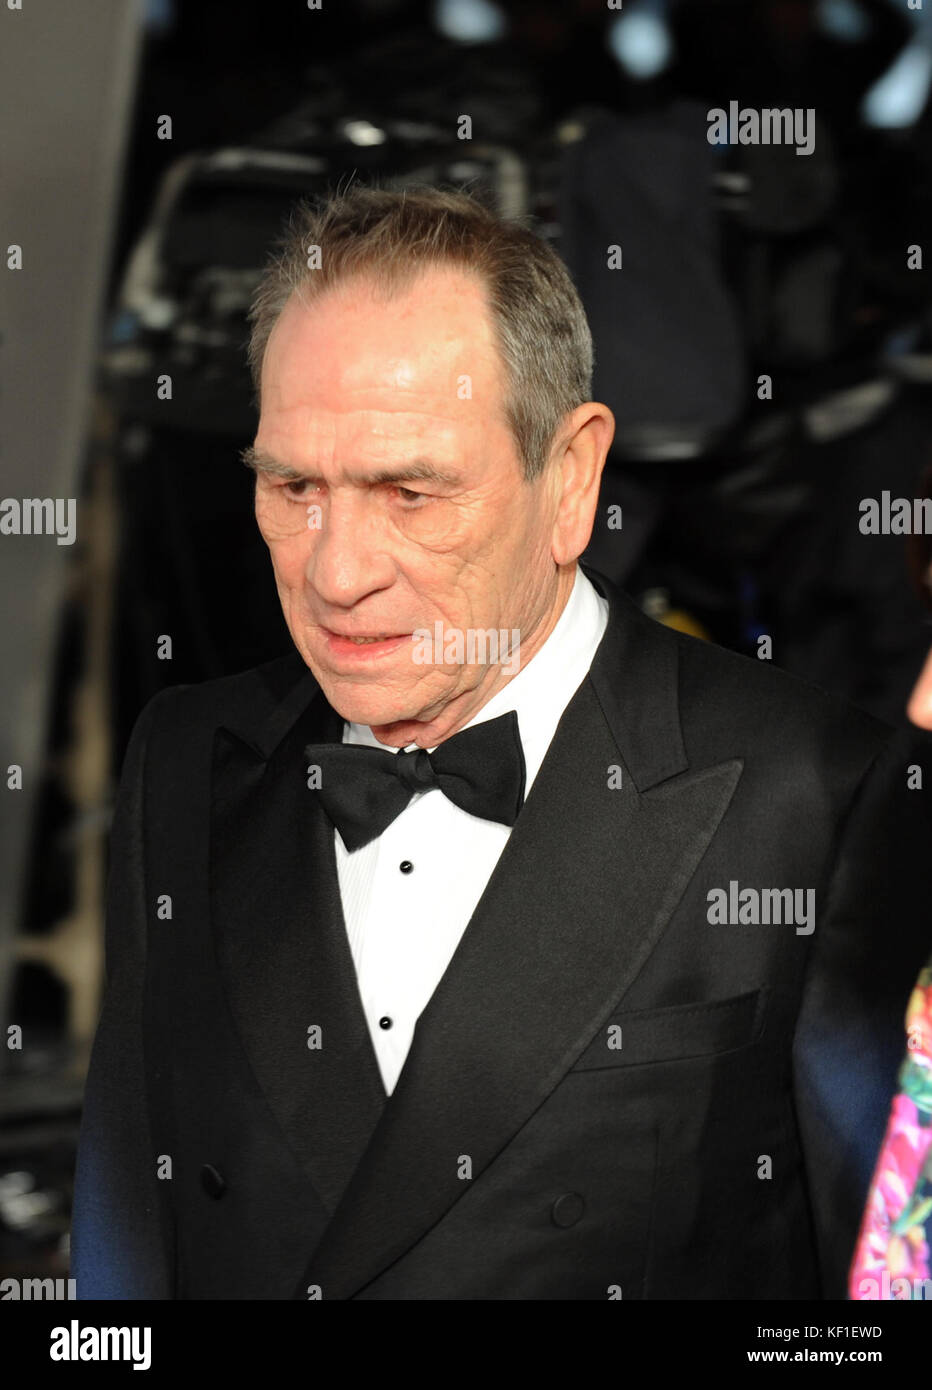 Tokyo, Japan. 25th Oct, 2017. Actor and director Tommy Lee Jones attends red carpet of the 30th Tokyo International Film Festival as president of International Competition Jury at Roppongi Hills in Tokyo on Oct. 25 2017. Credit: Hiroko Tanaka/Alamy Live News Stock Photo